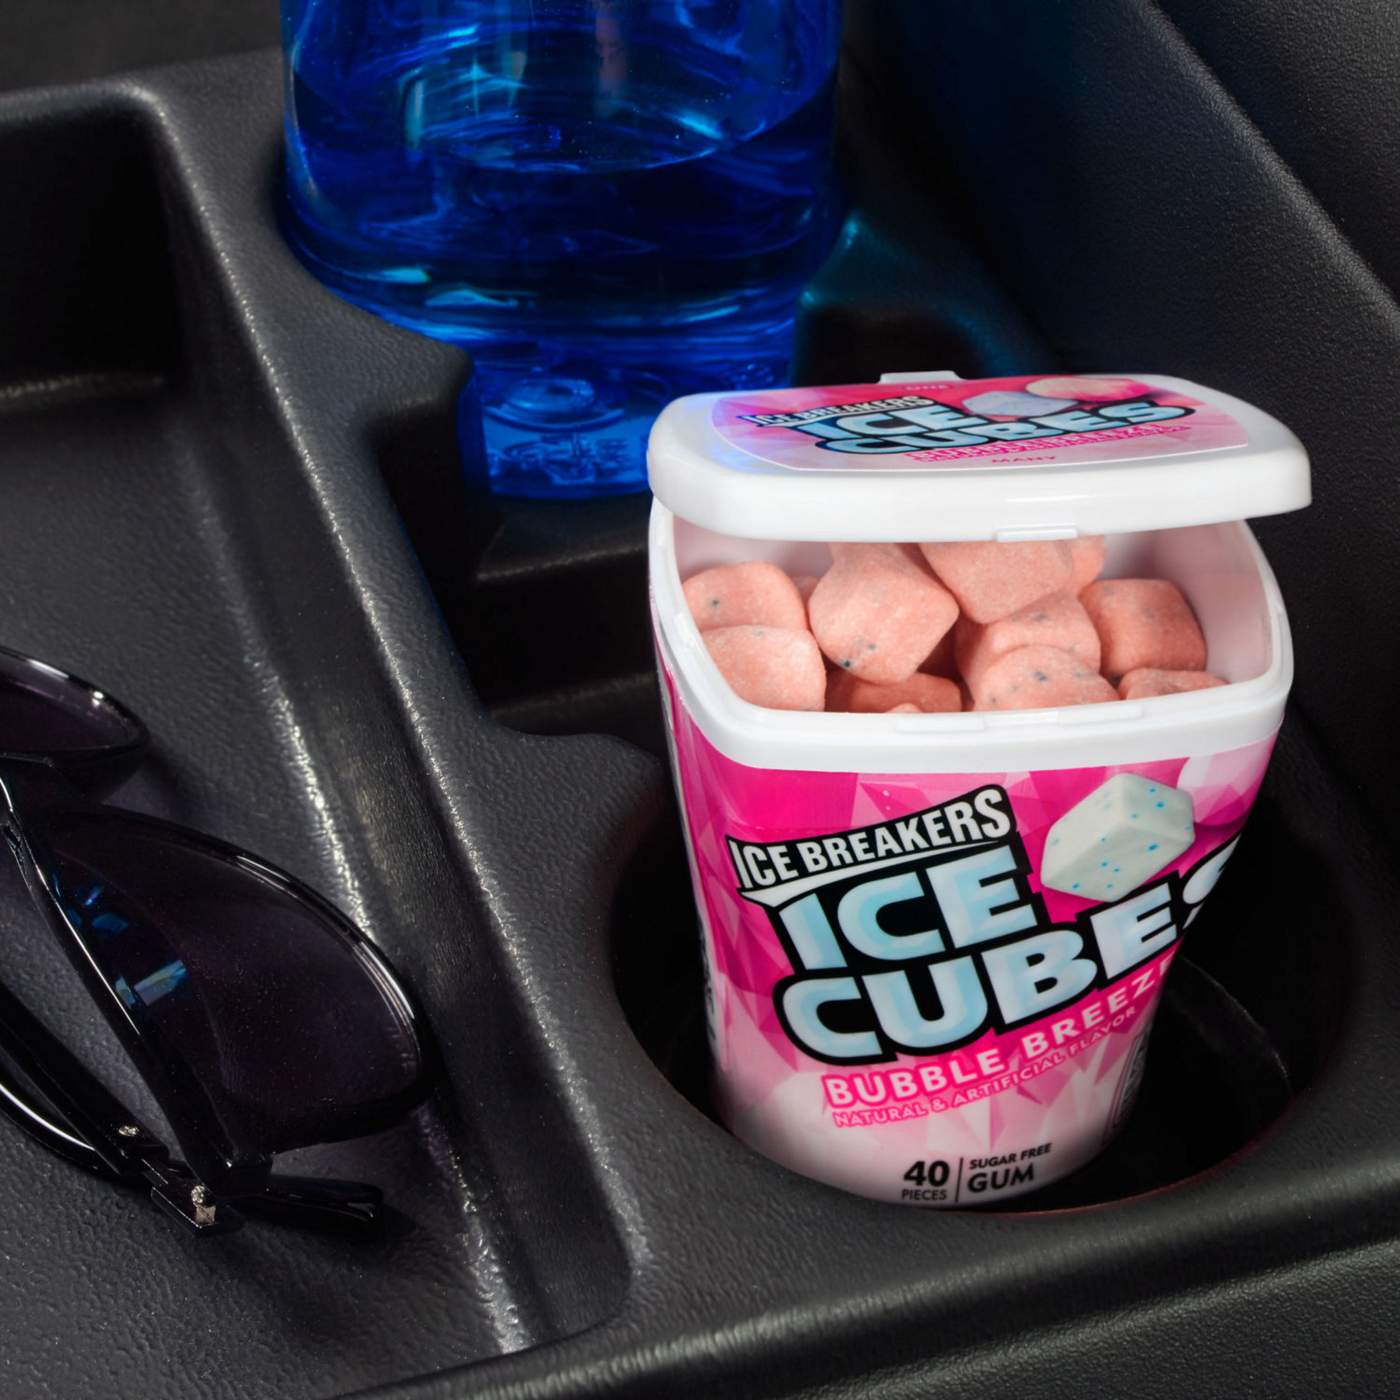 Ice Breakers Ice Cubes Sugar Free Chewing Gum - Bubble Breeze; image 3 of 7